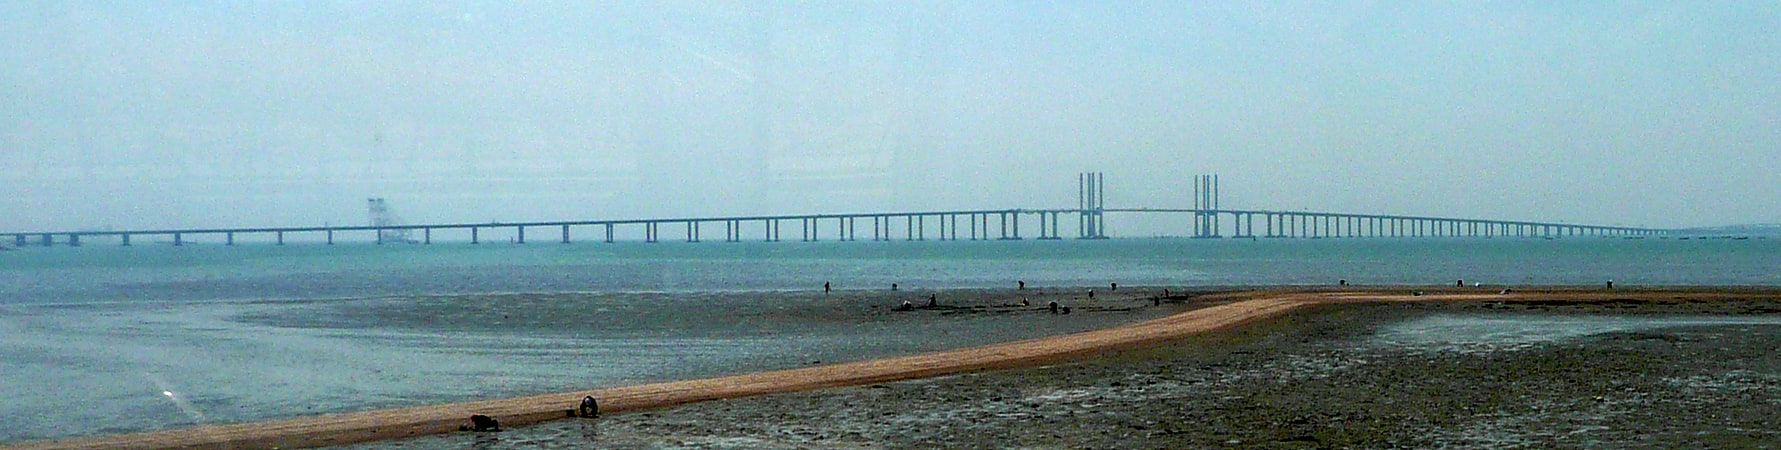 Cable-stayed bridge in Qingdao, China